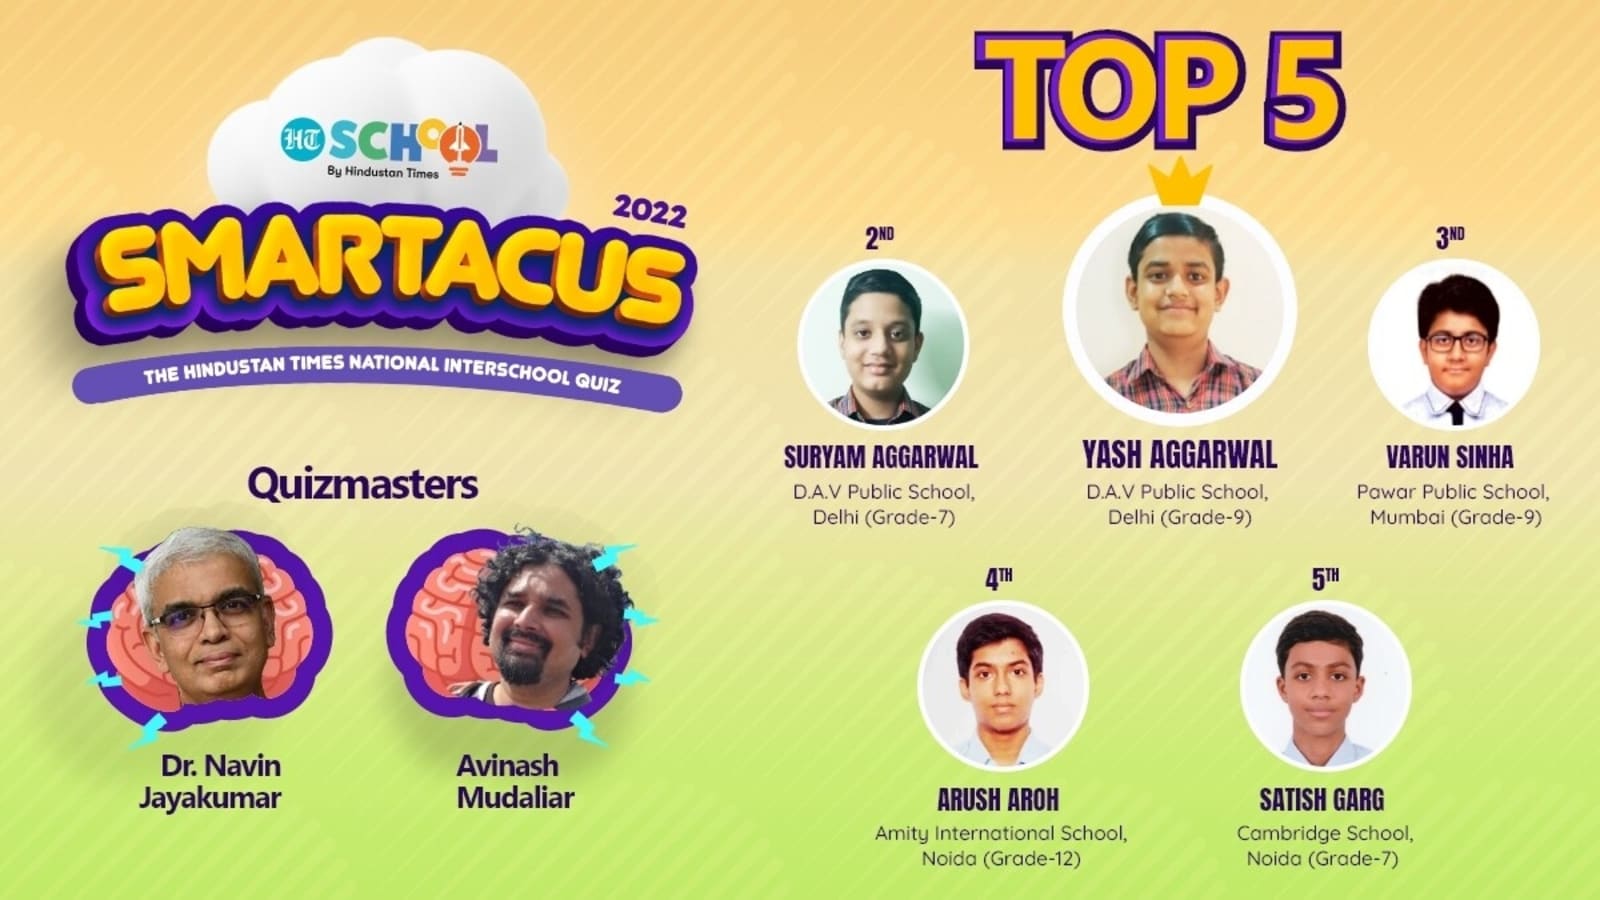 Meet the champions of Smartacus 2022 Selection Round